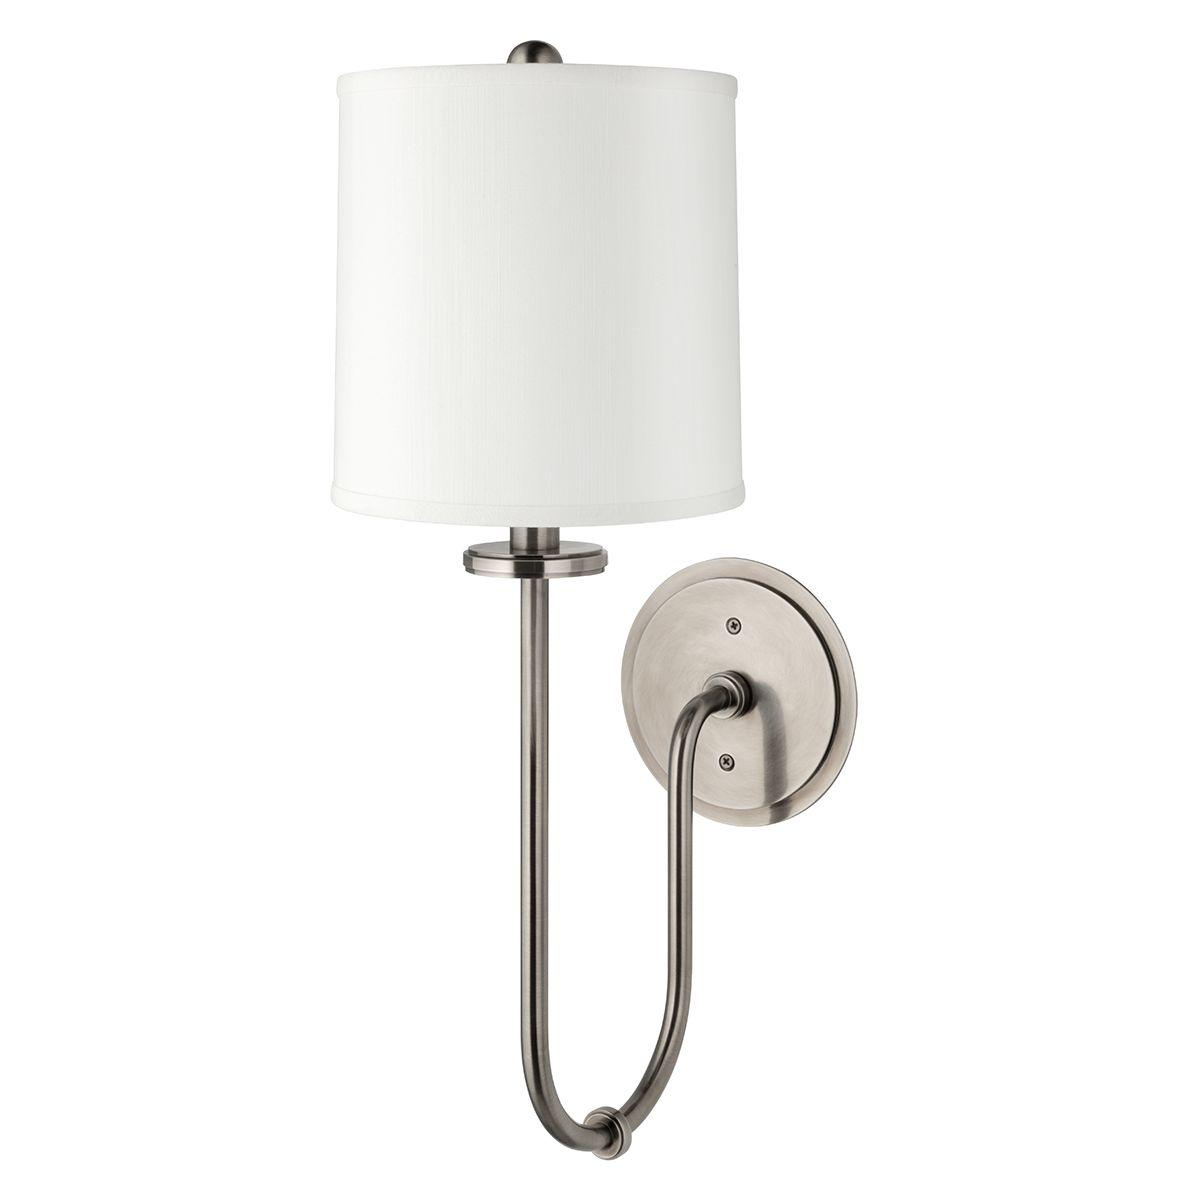 Jericho 21 in. Armed Sconce